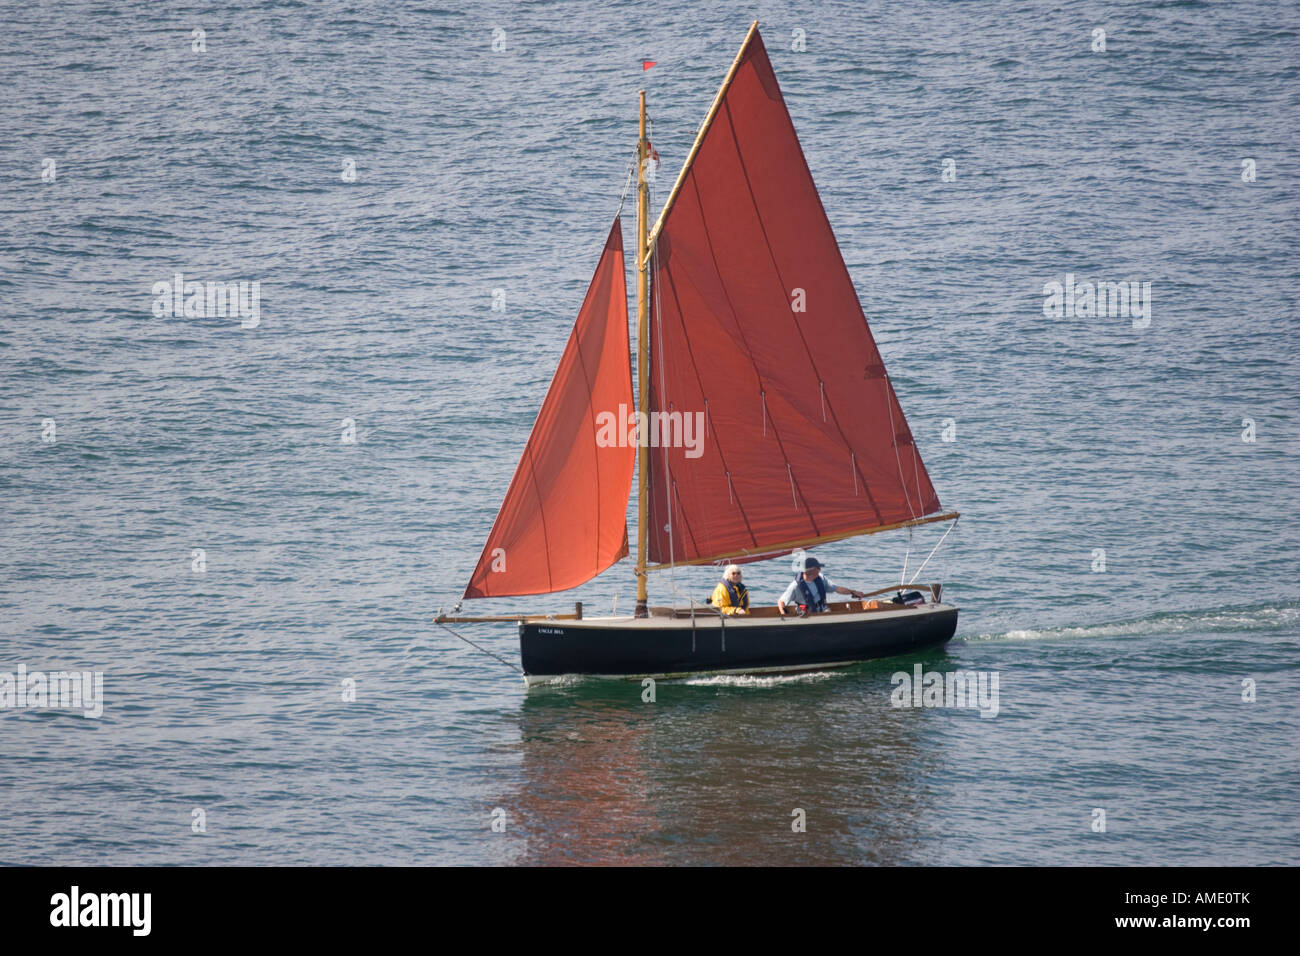 Small gaff rigged sailing boat with orange sails Poole Harbour Dorset UK Stock Photo